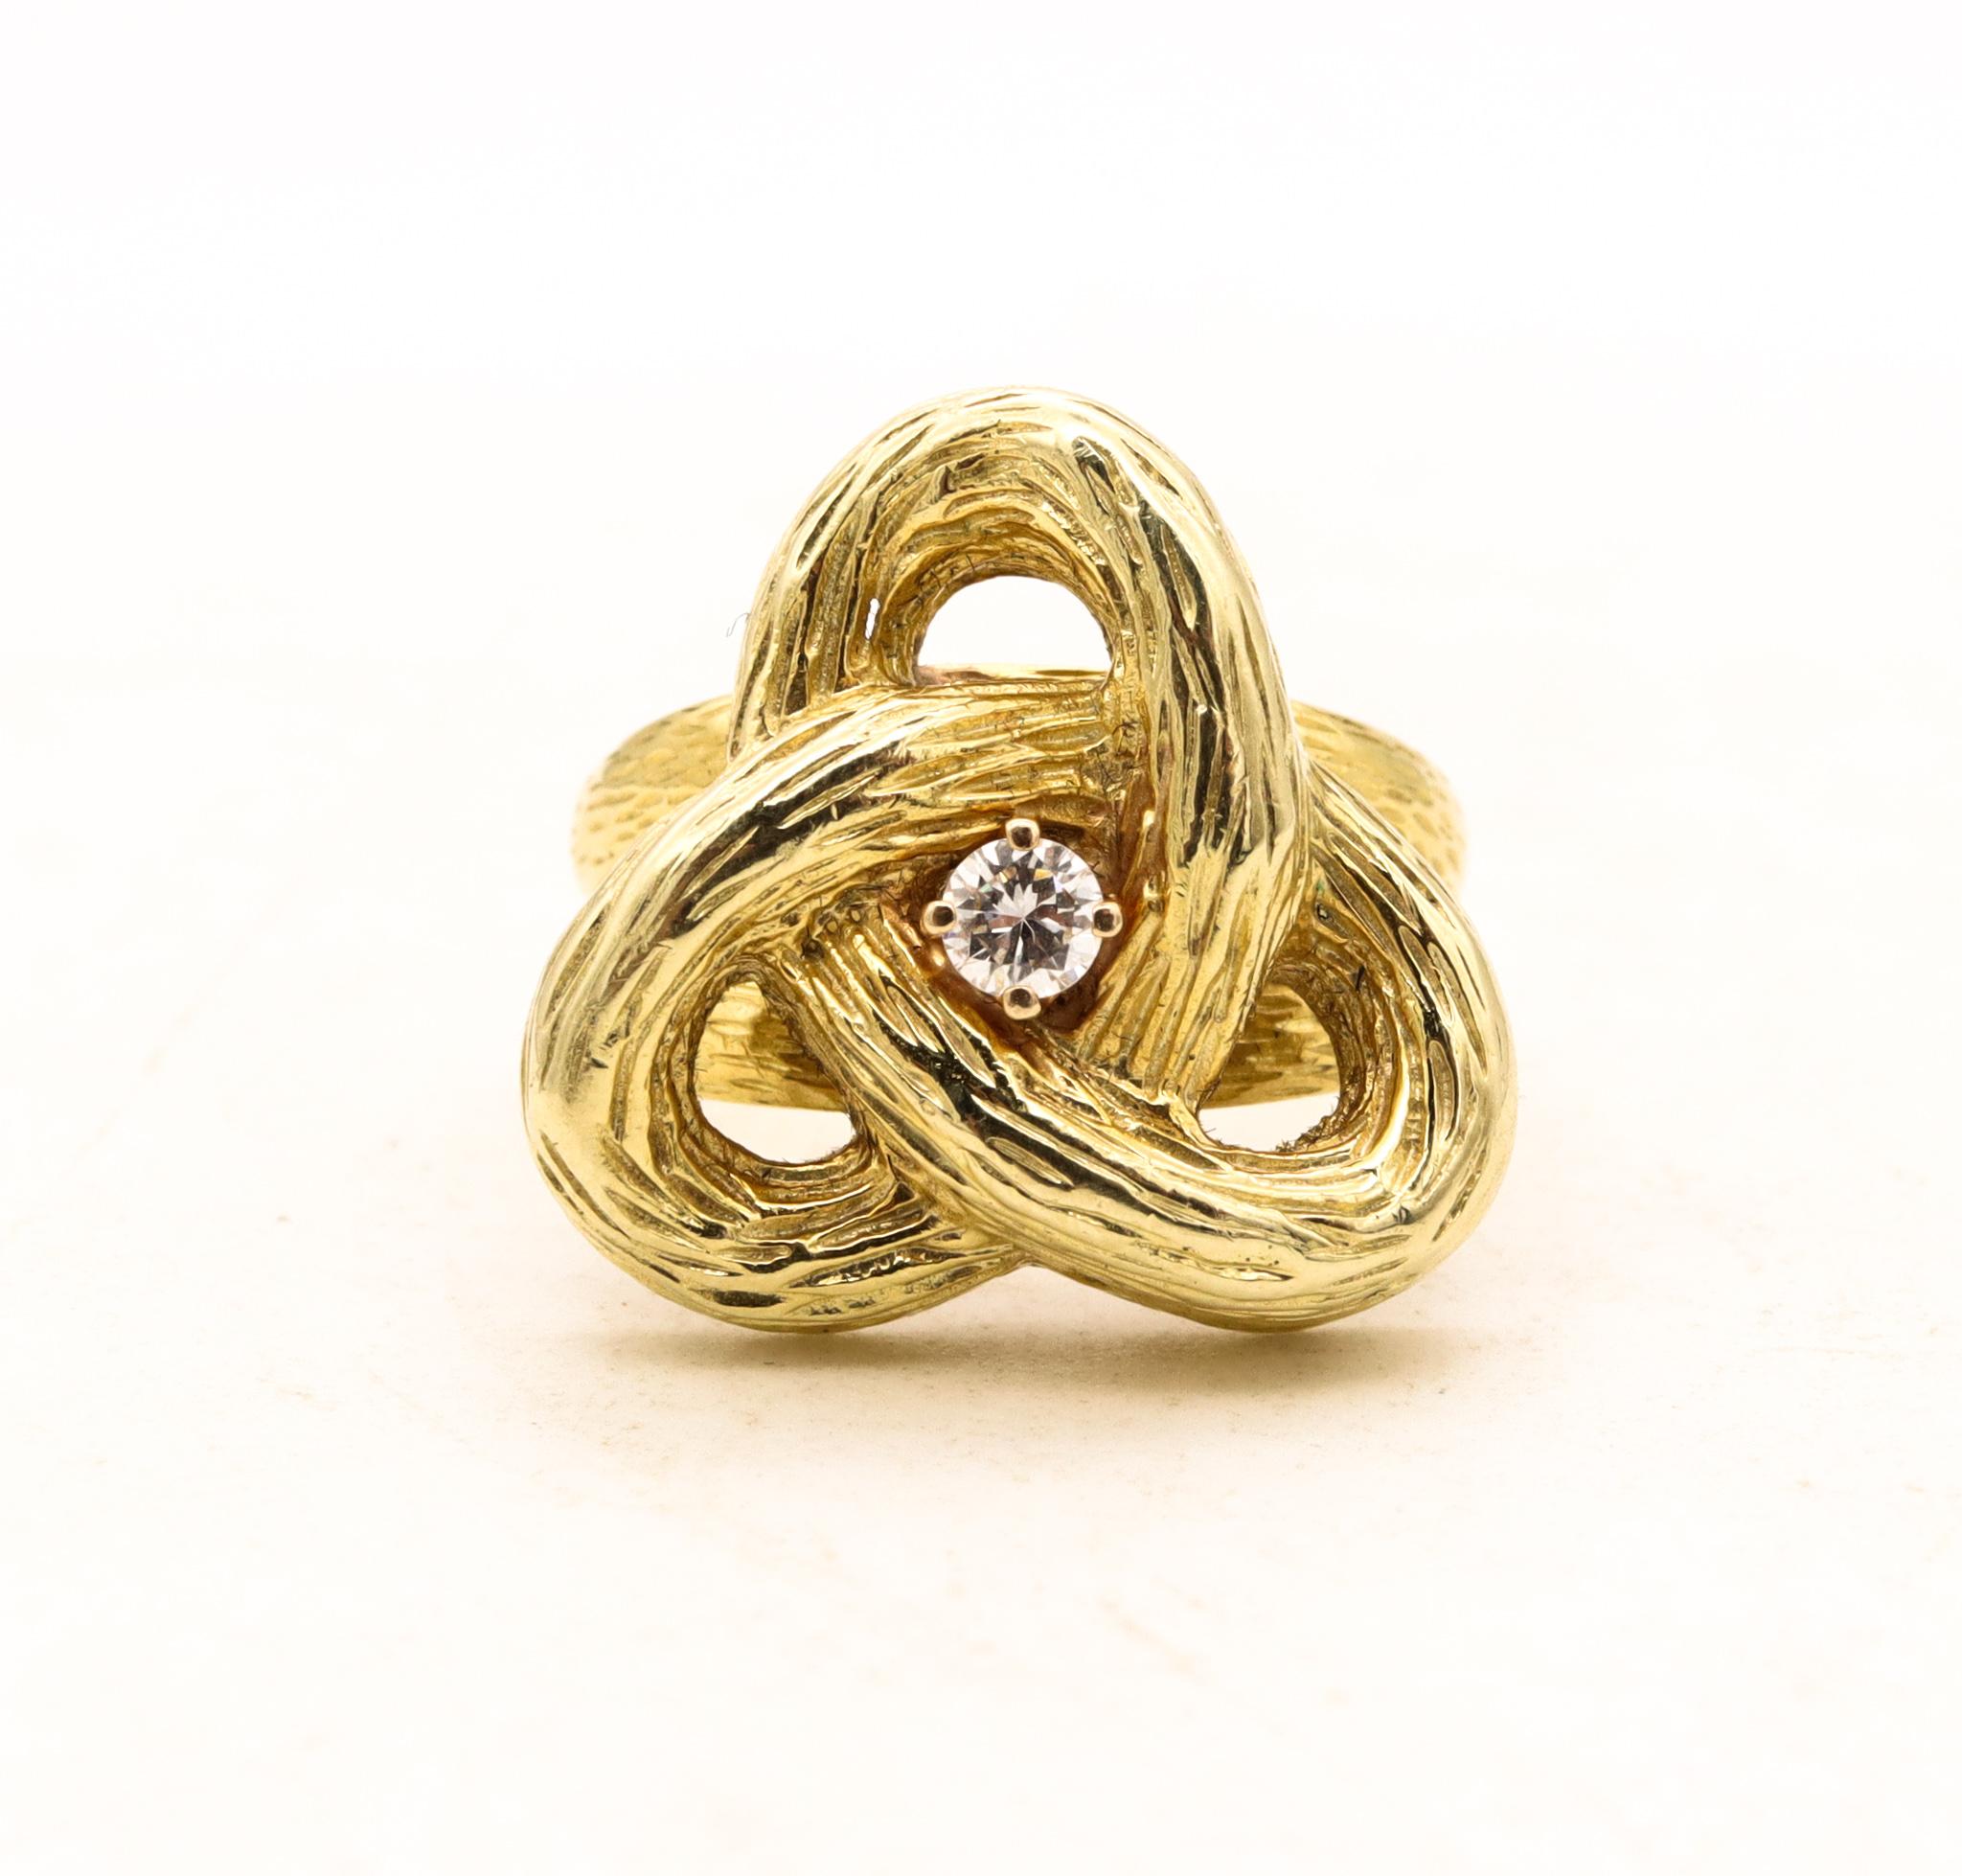 Cartier 1970 Celtic Triquetra Knot Ring in 18Kt Yellow Gold with VS Diamond 2